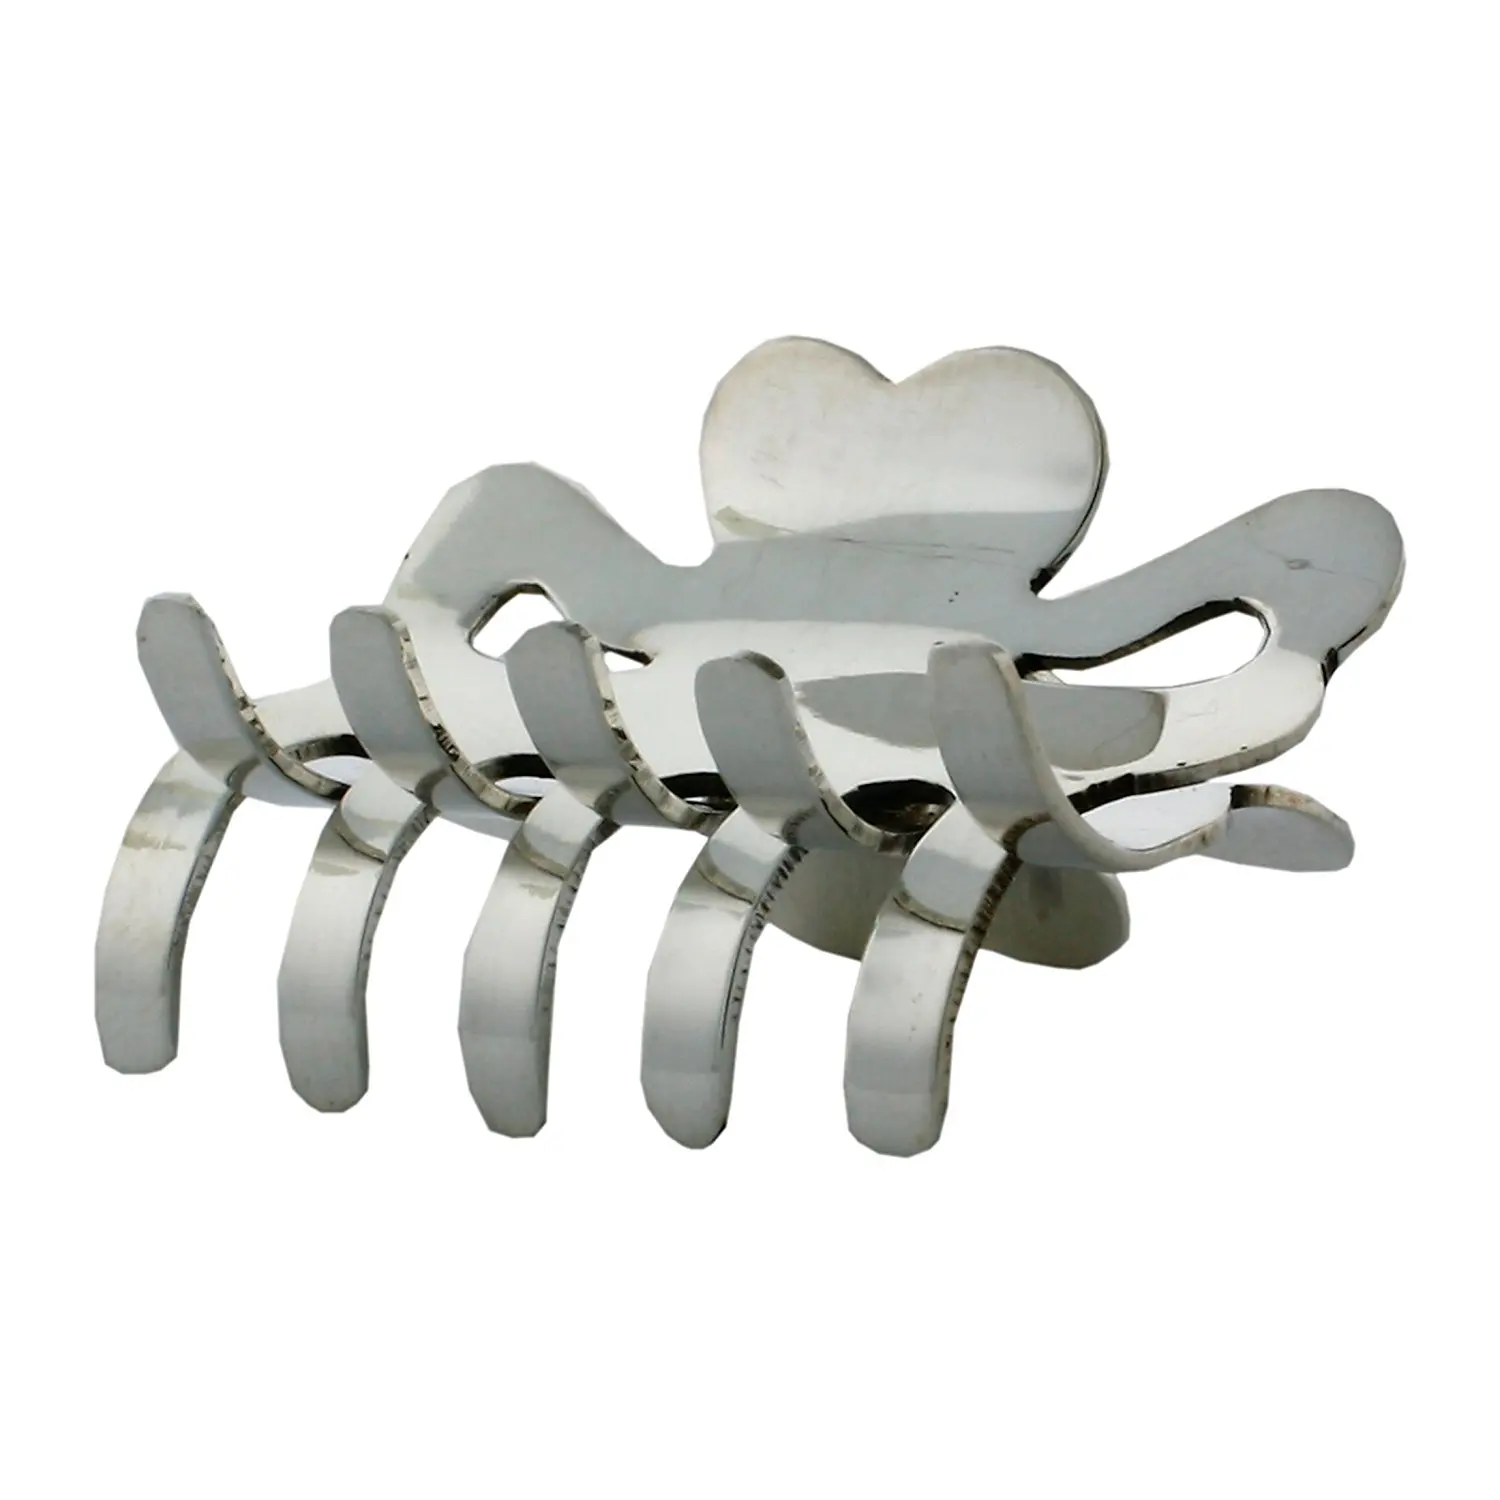 metal jaw hair clips